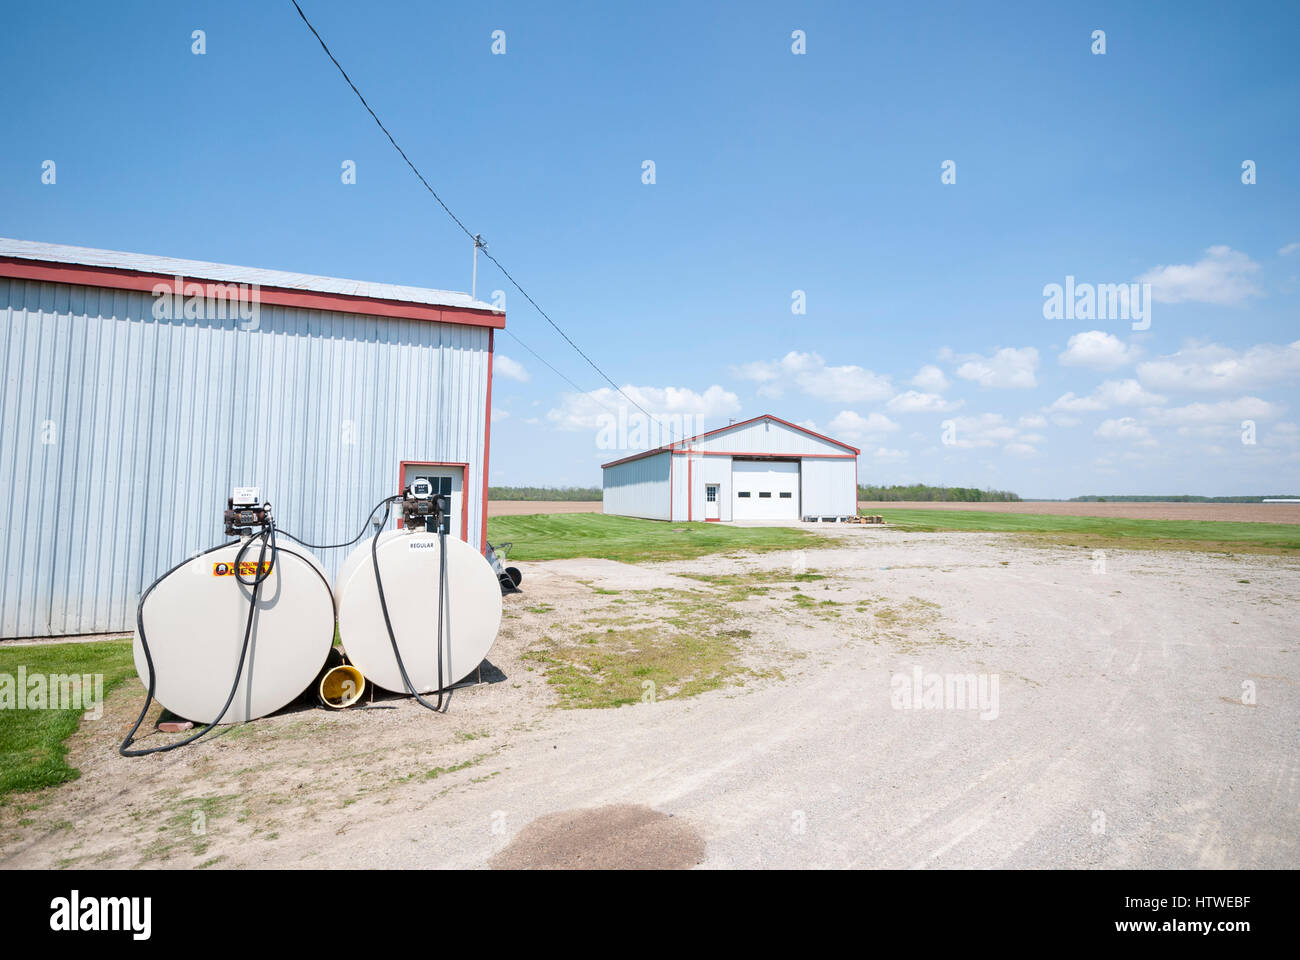 Gasboy fuel tanks and outbuildings on a corn farm in rural southern Ontario Canada. Stock Photo